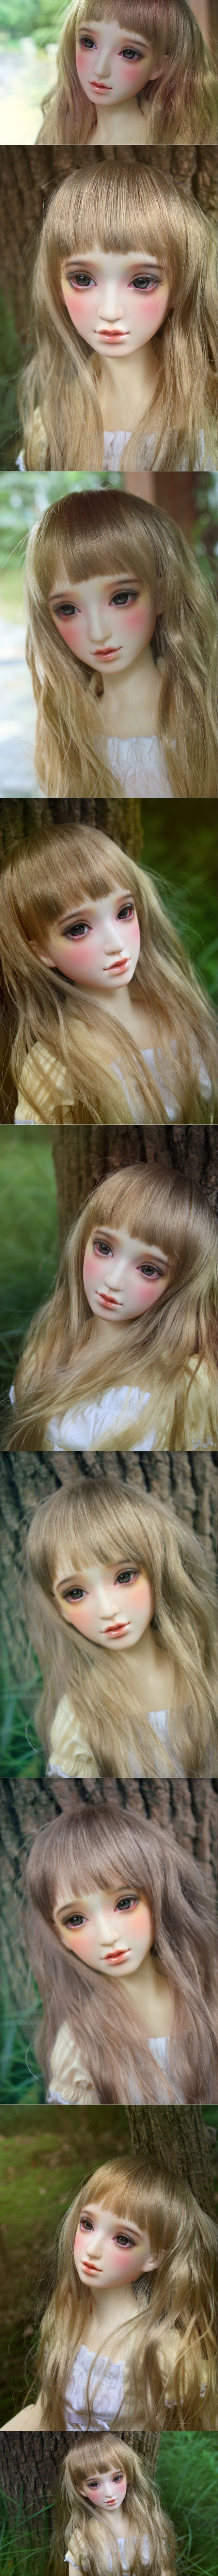 BJD Chestnut2 Ball Jointed Doll